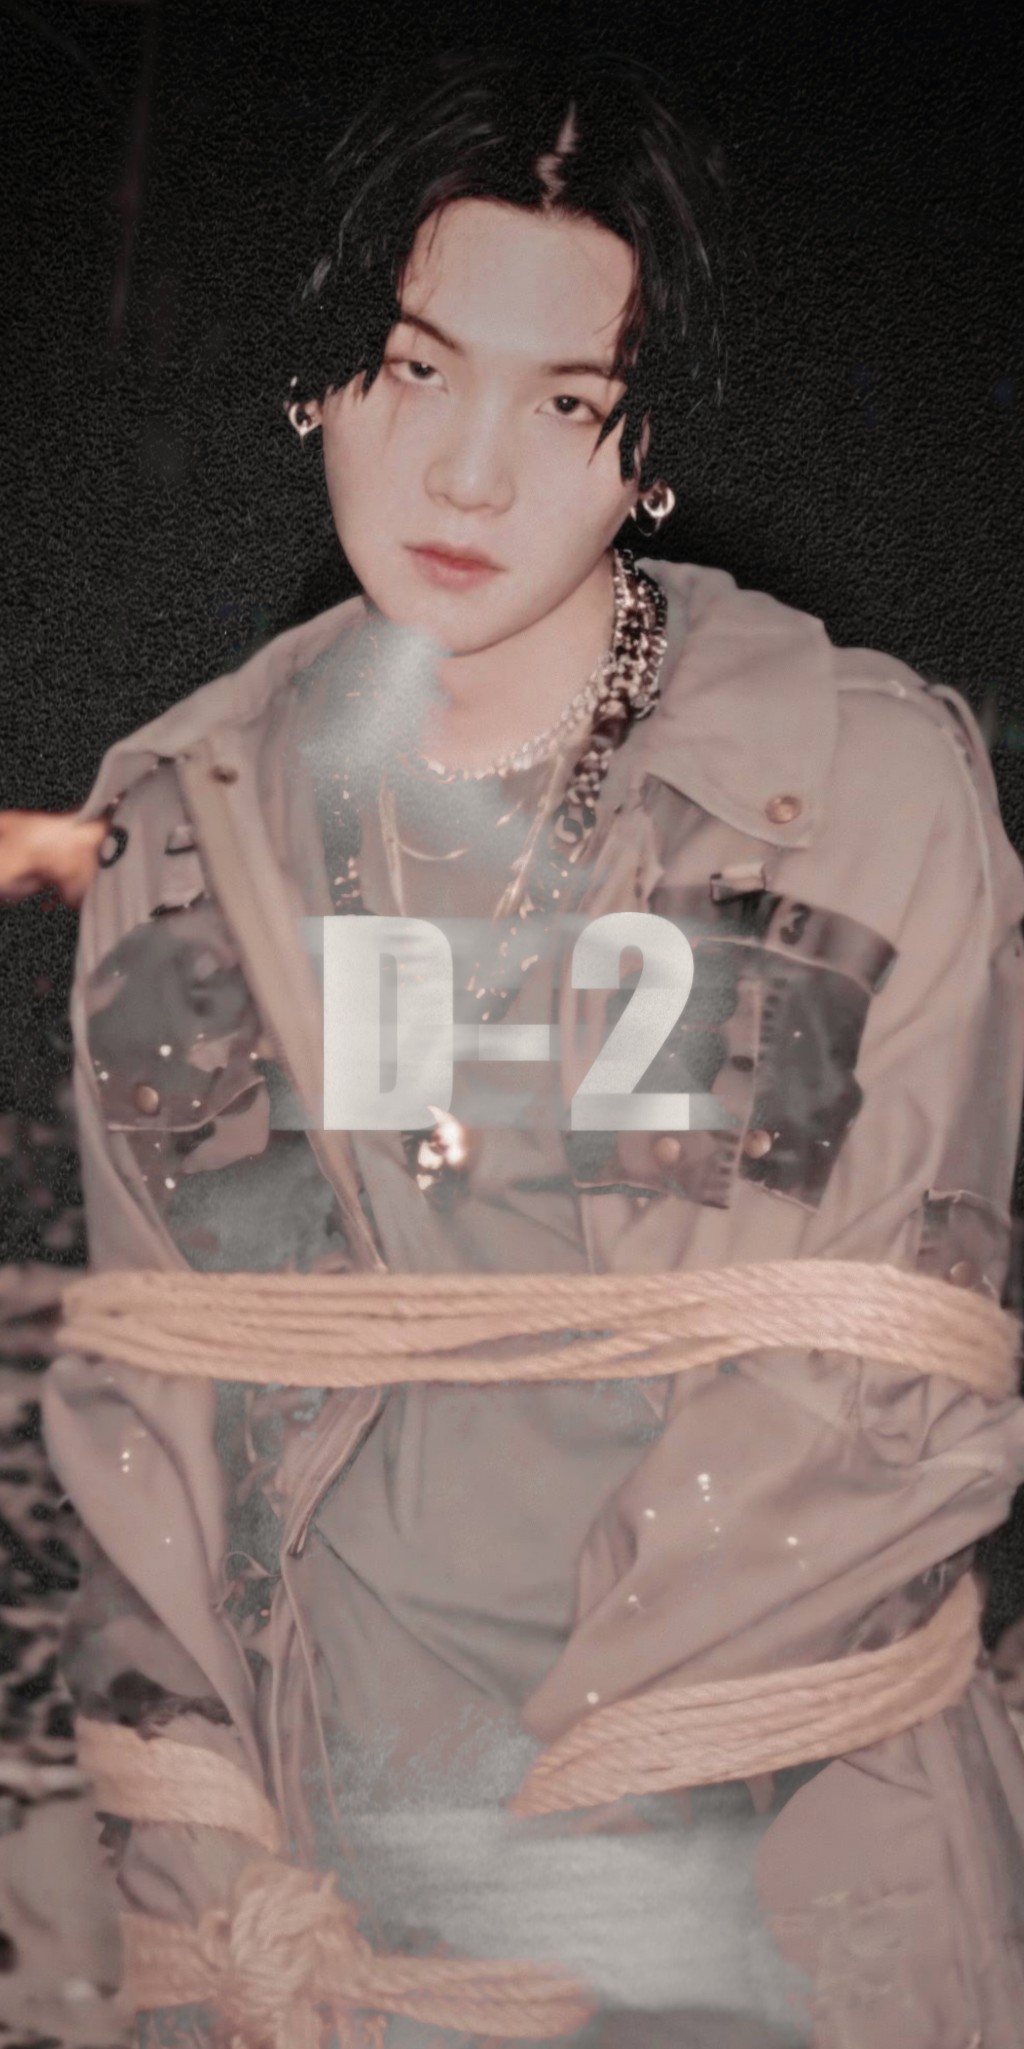 REST] — yoongi gothcore wallpapers;; ♡ like or reblog if